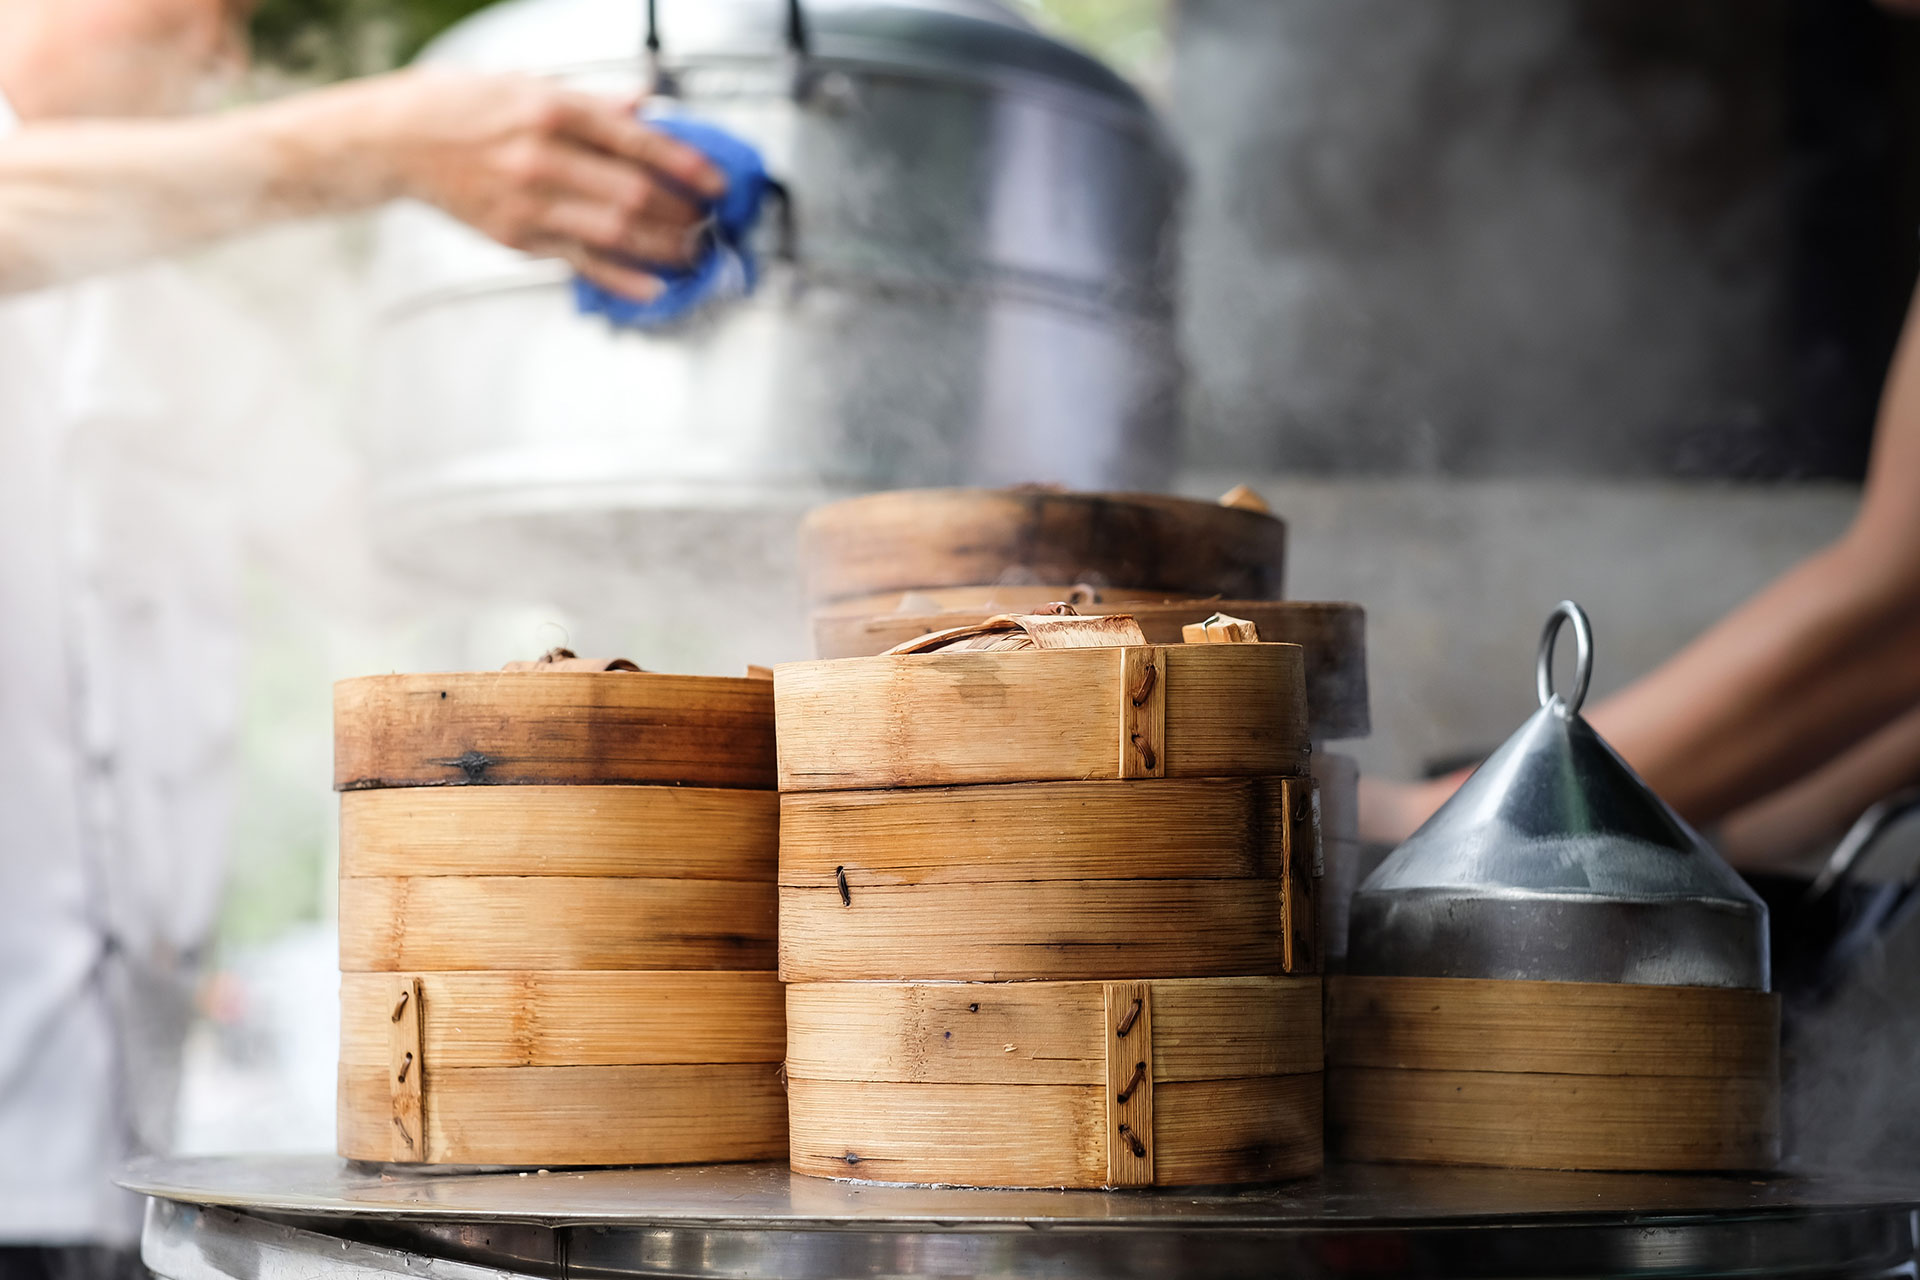 How to Cook With a Bamboo Steamer, Plus Recipes